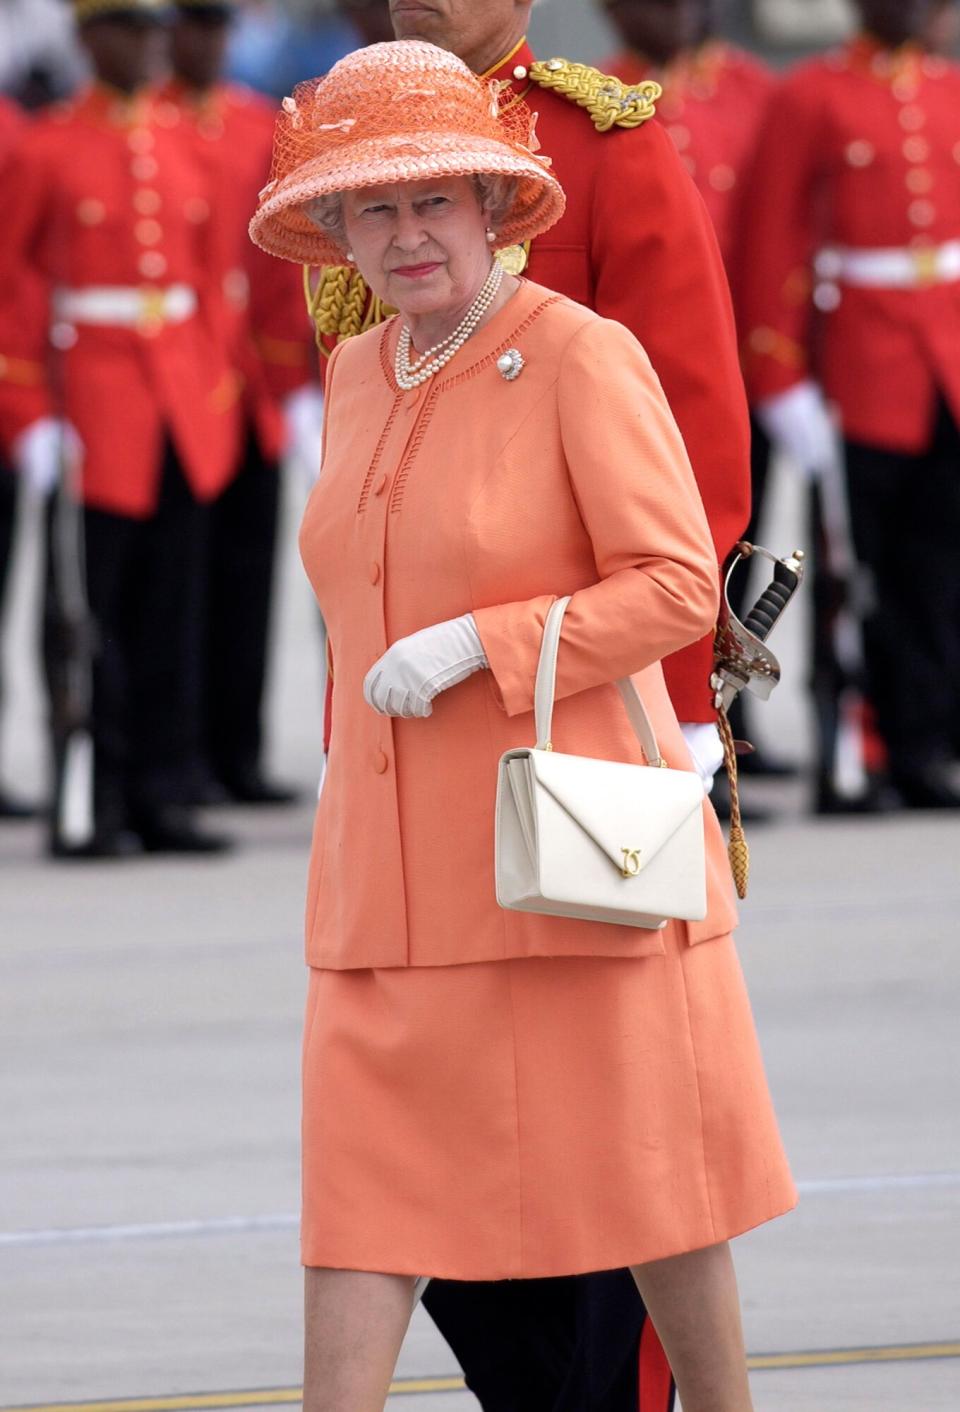 Queen Elizabeth II On Her Jubilee Tour On A Royal Tour To Jamaica Wearing A Suit Designed By Fashion Designer Hardy Amies And A Hat Designed By Milliner Frederick Fox With A Handbag By Launer